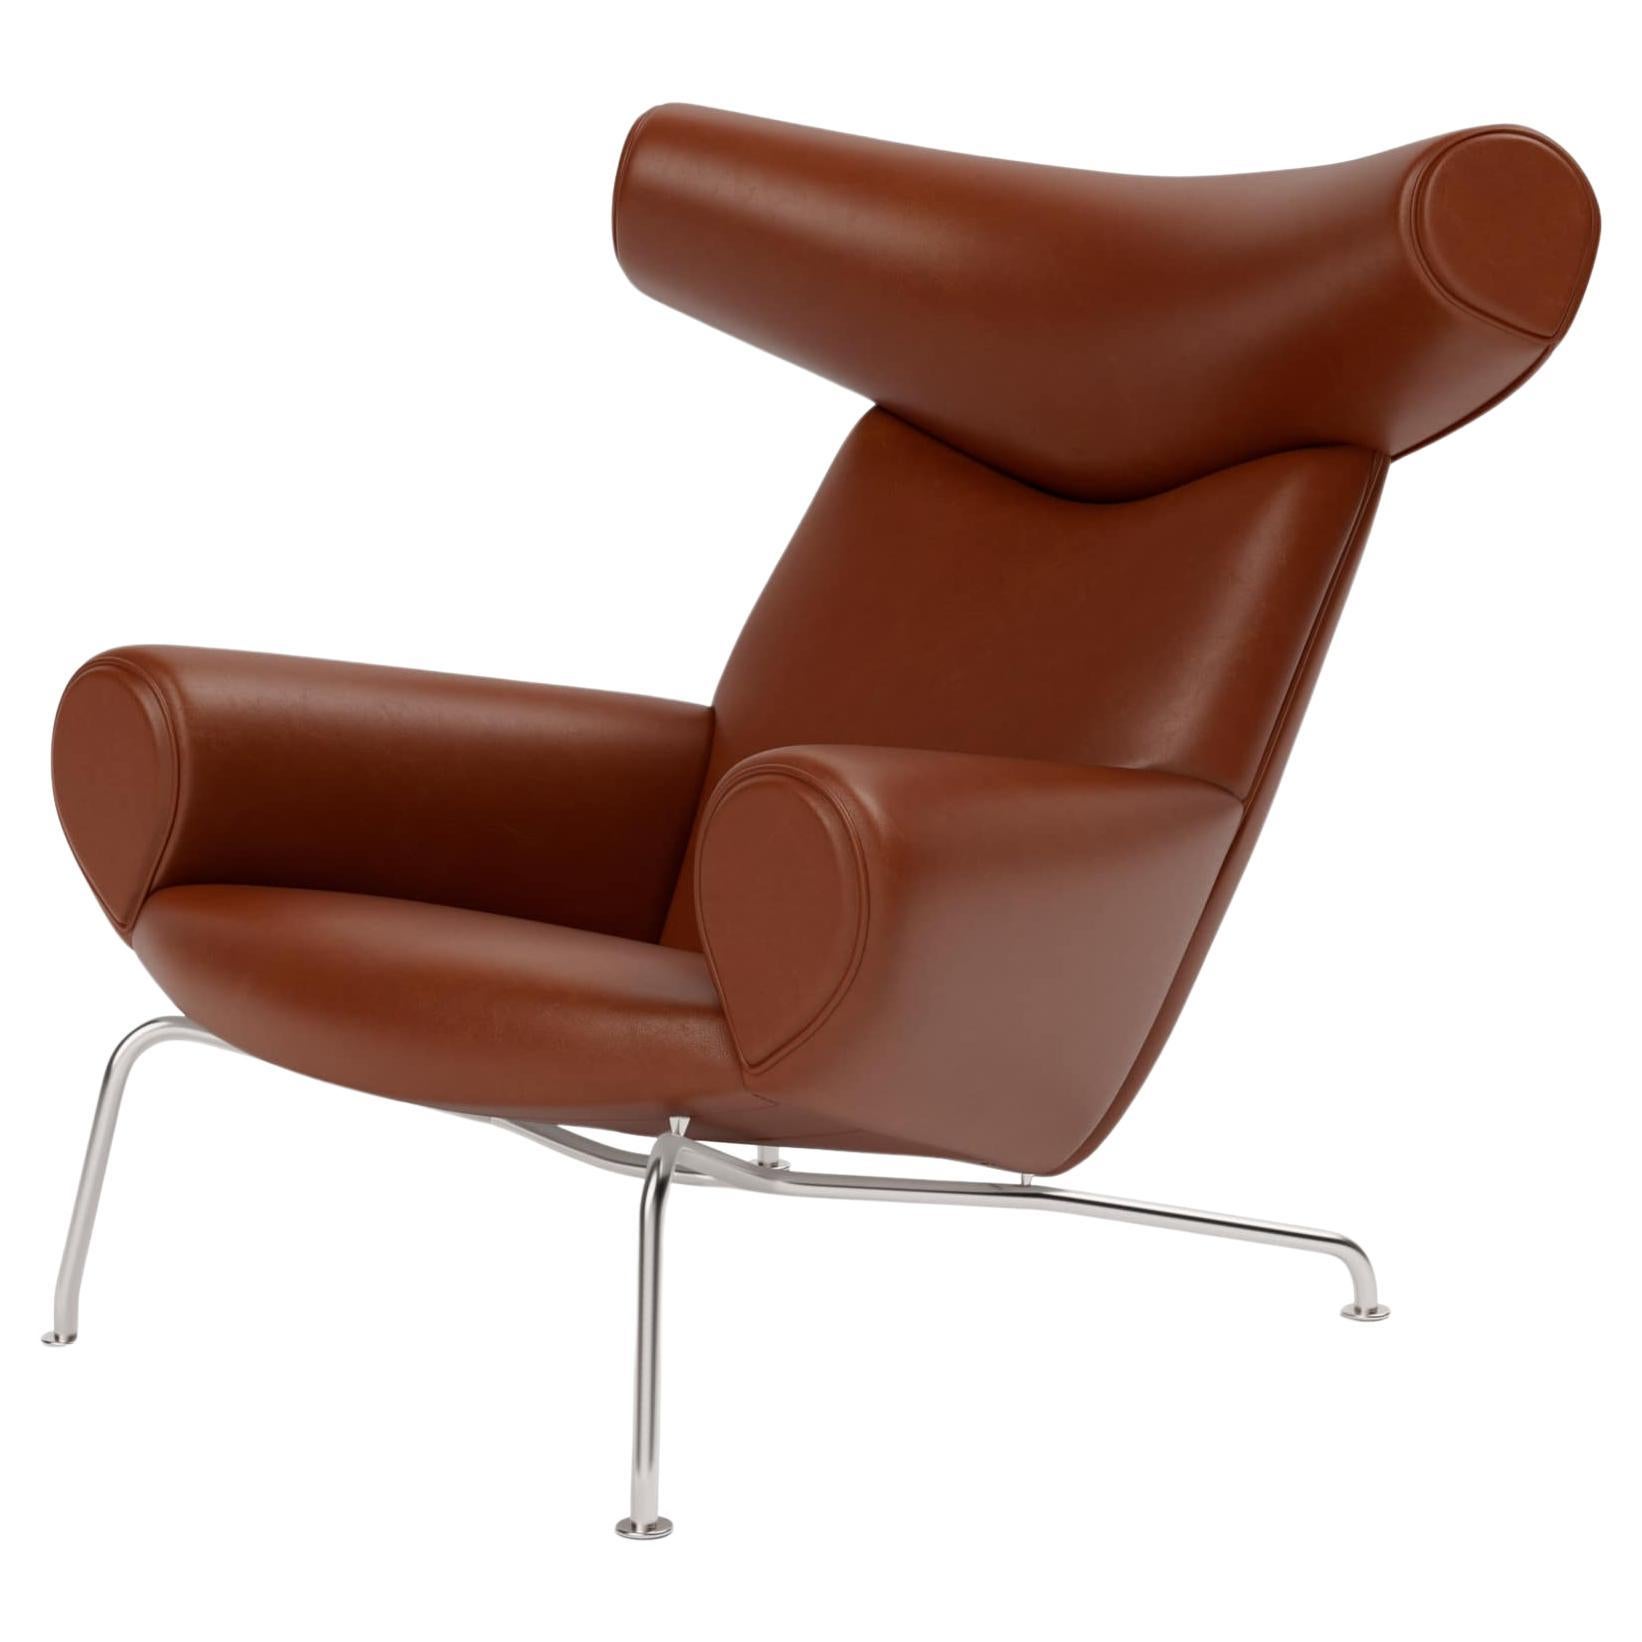 Wegner Ox Chair-Russet Brown/Brushed Stainless Steel-by HansJ. Wegner Fredericia For Sale